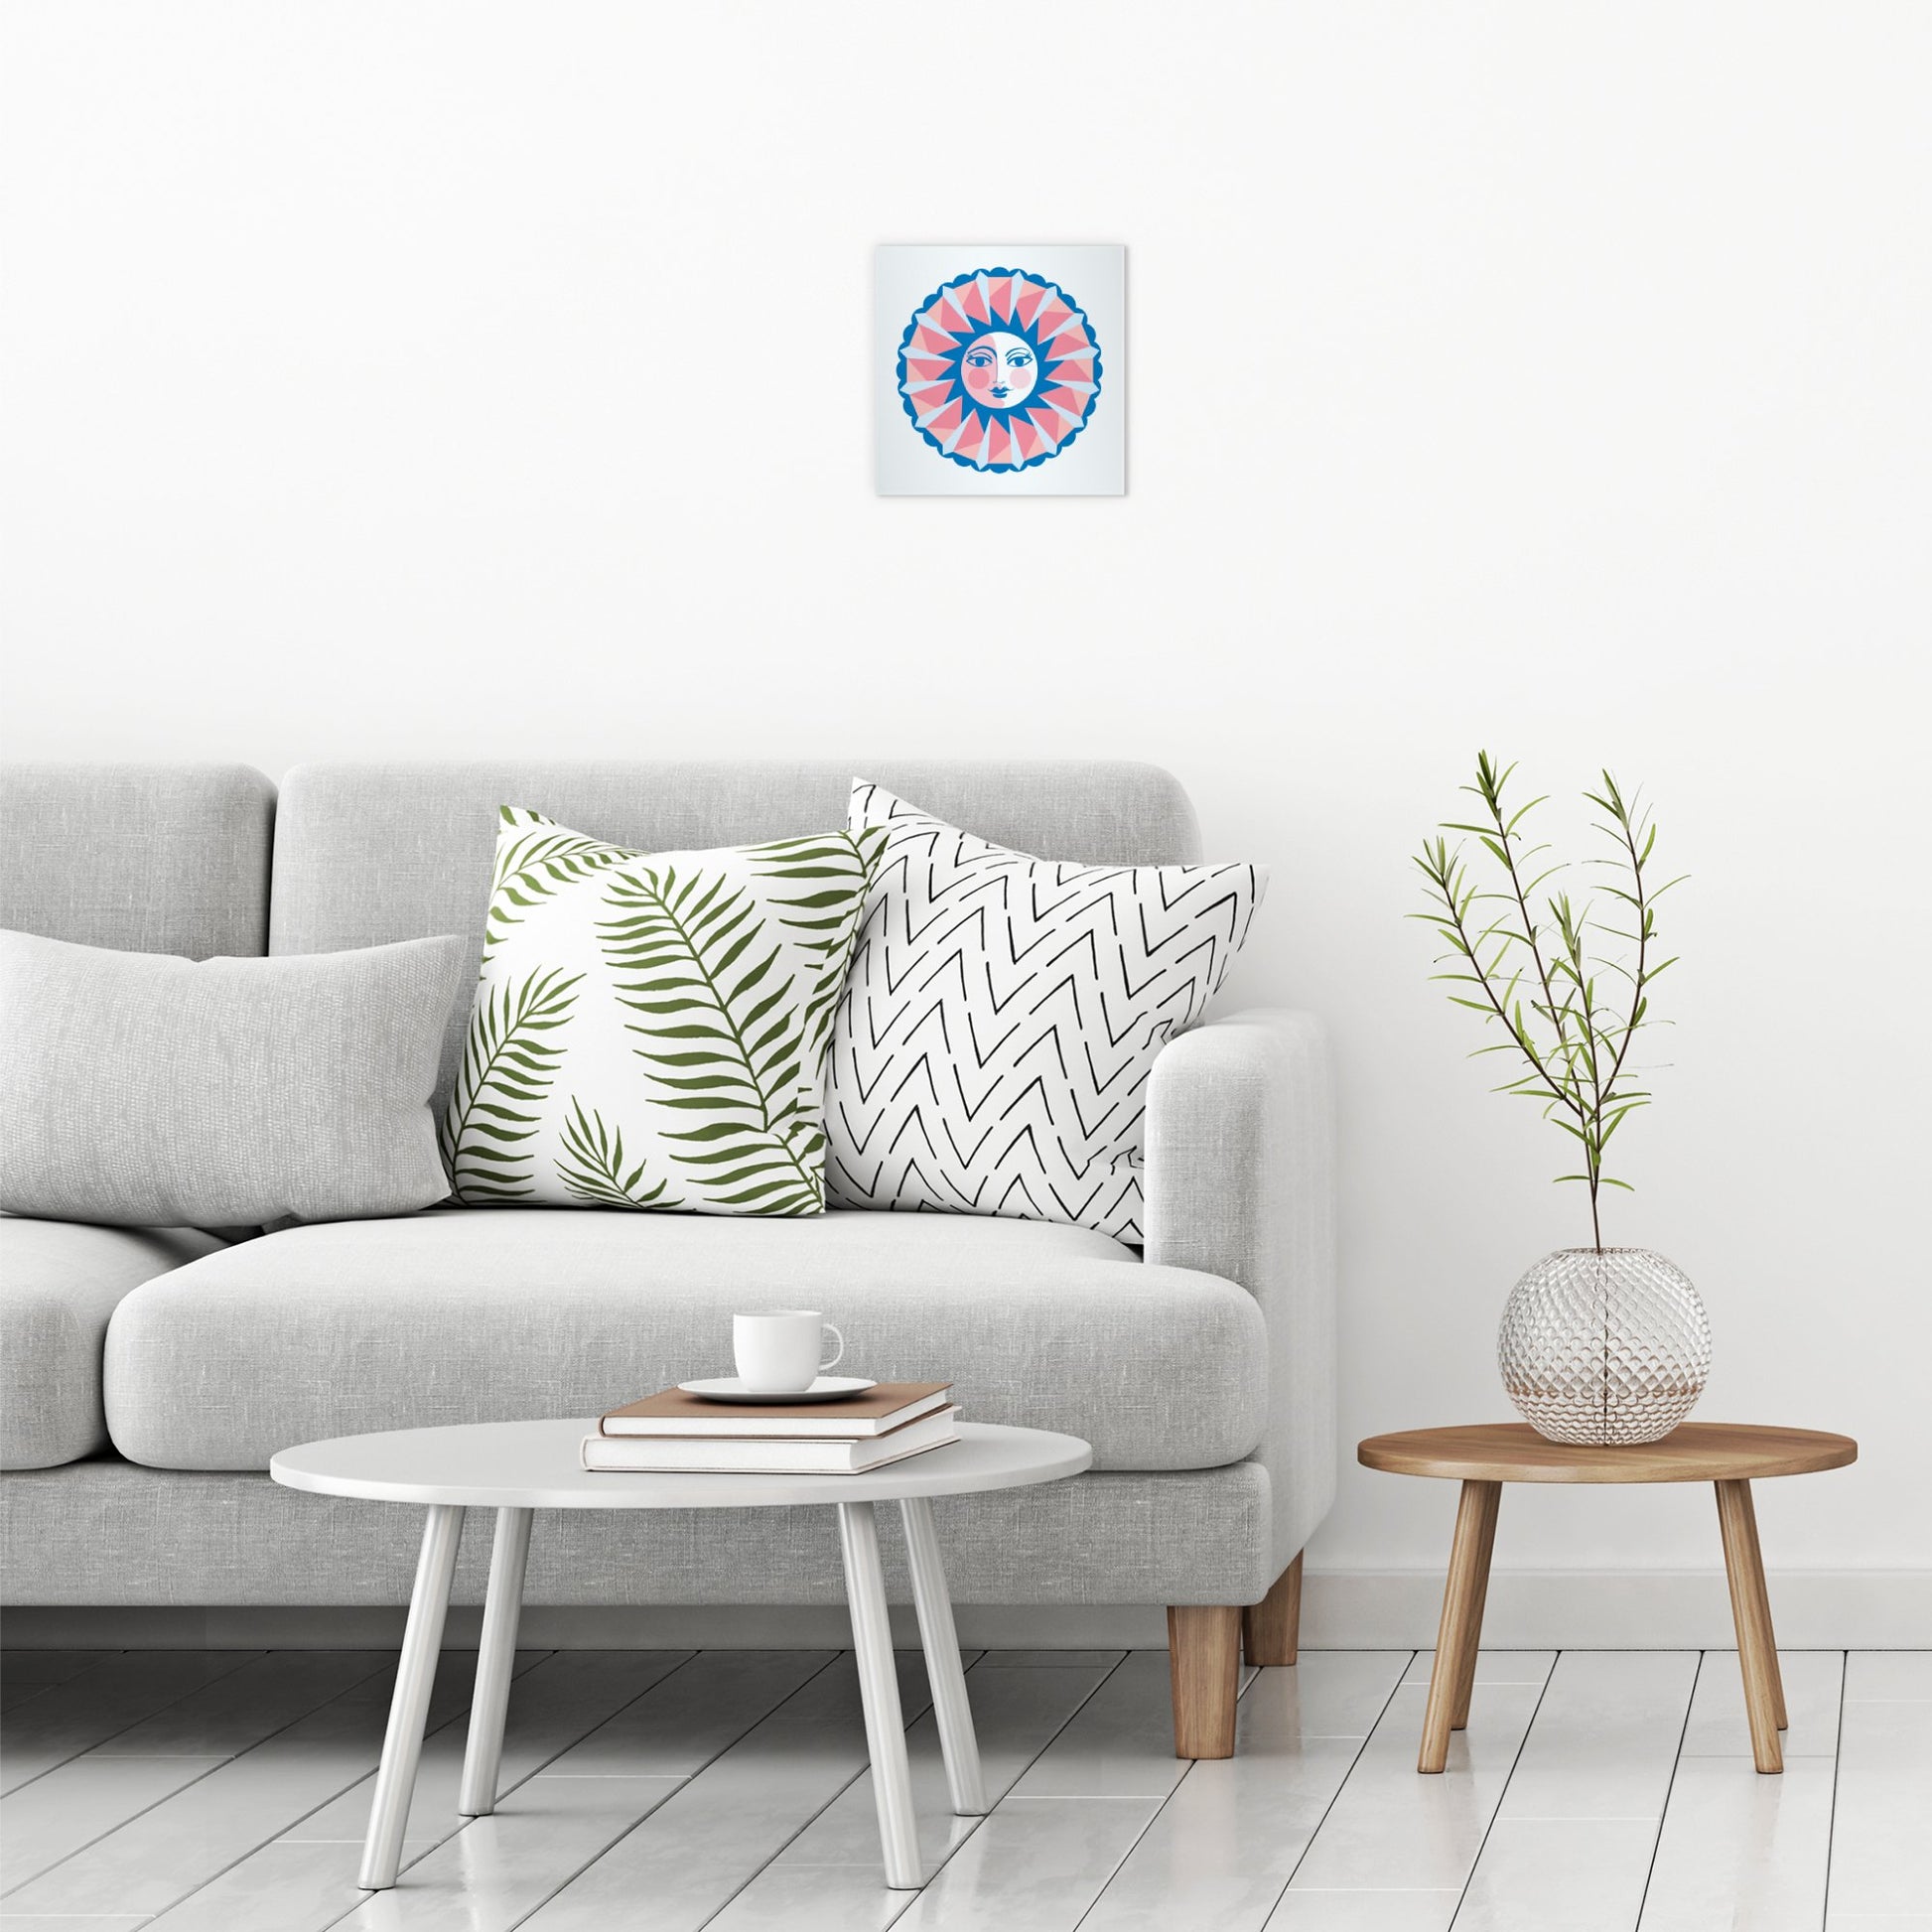 A contemporary modern room view showing a small size metal art poster display plate with printed design of a Sun Face Design